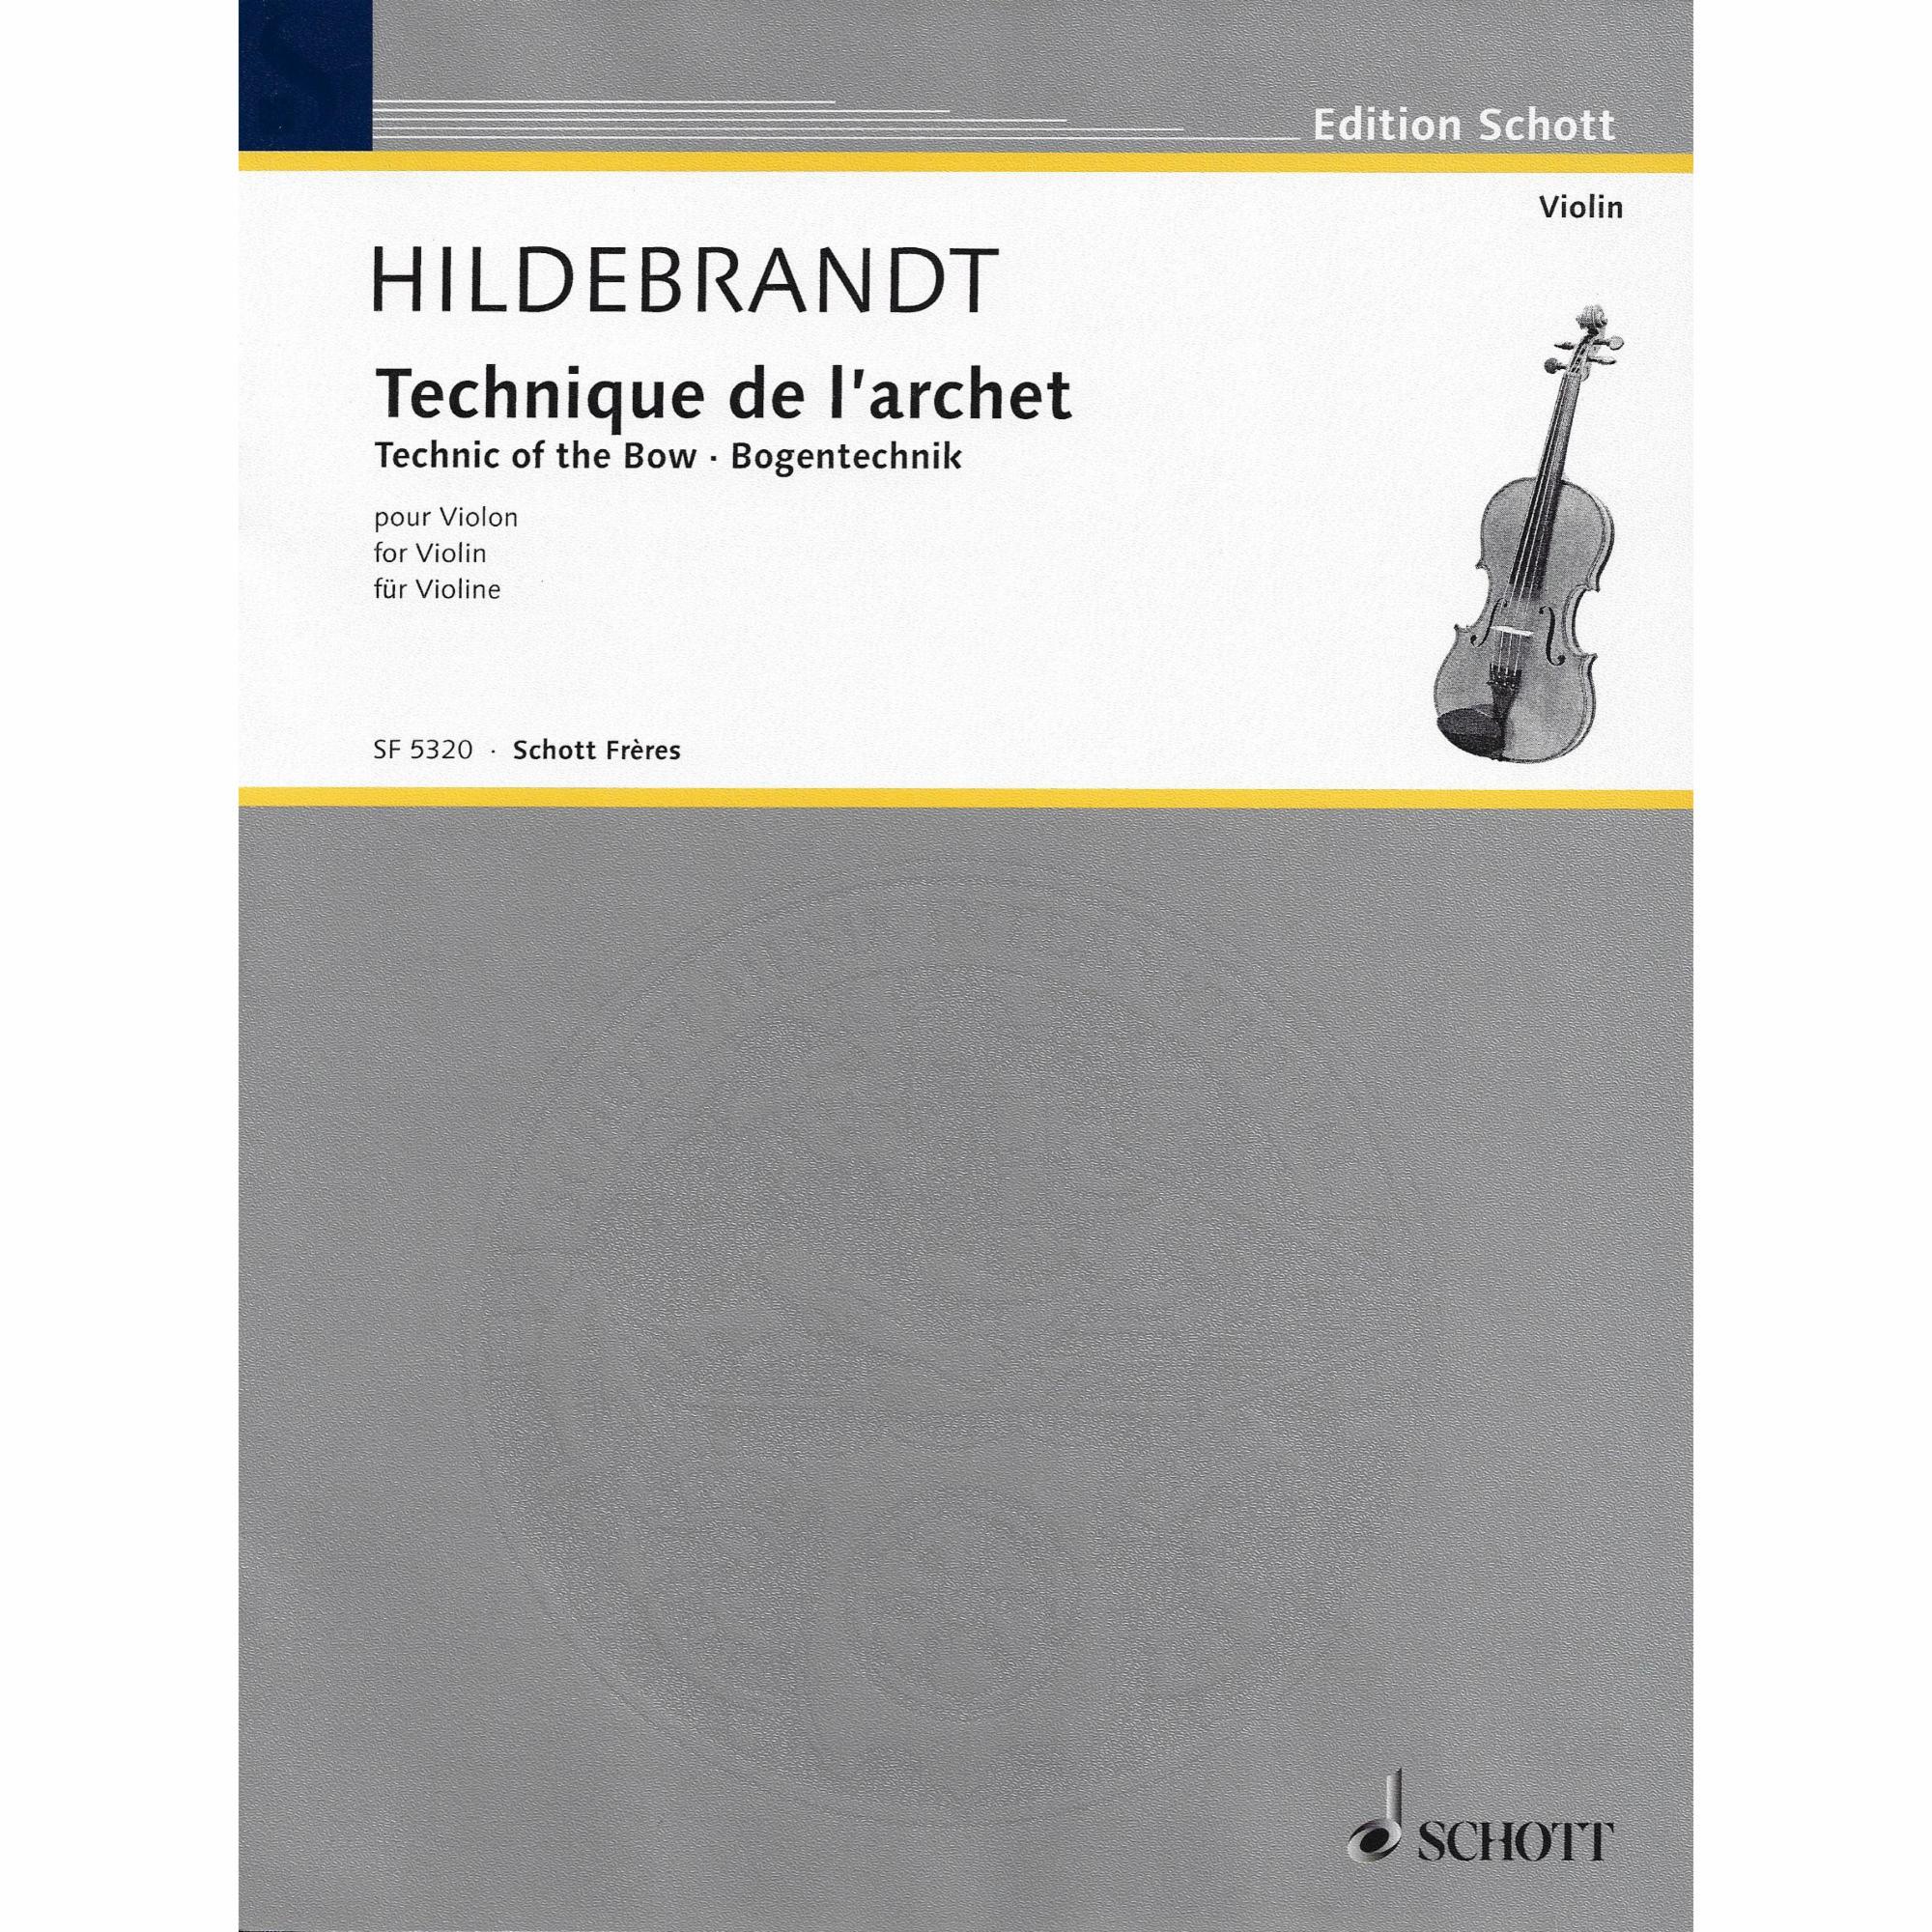 Hildebrandt -- Technic of the Bow for Violin